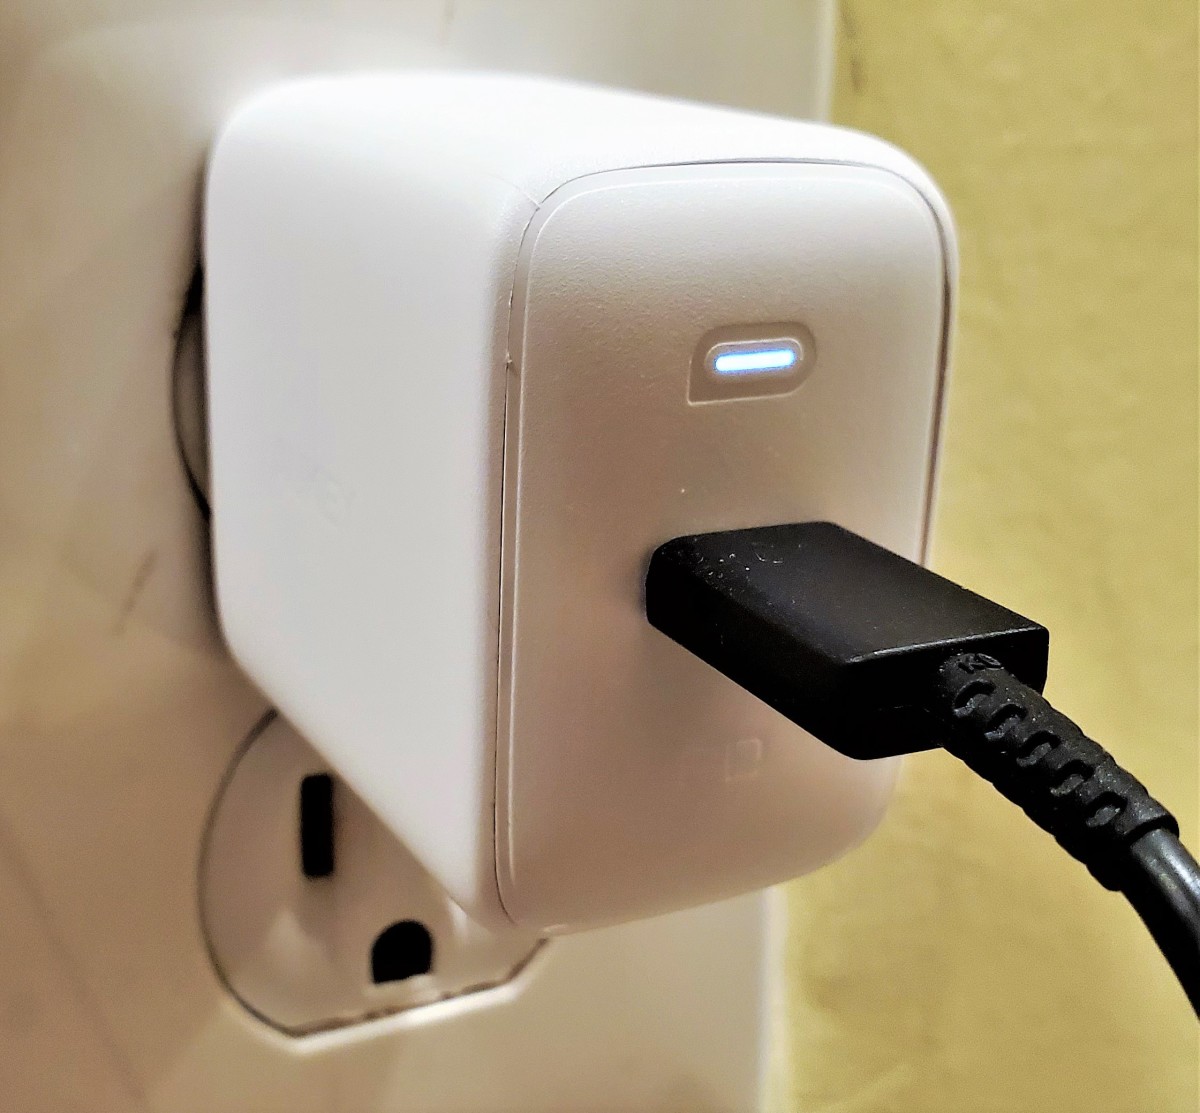 Aukey 61W PD Wall Charger: The Smallest Laptop Adapter?